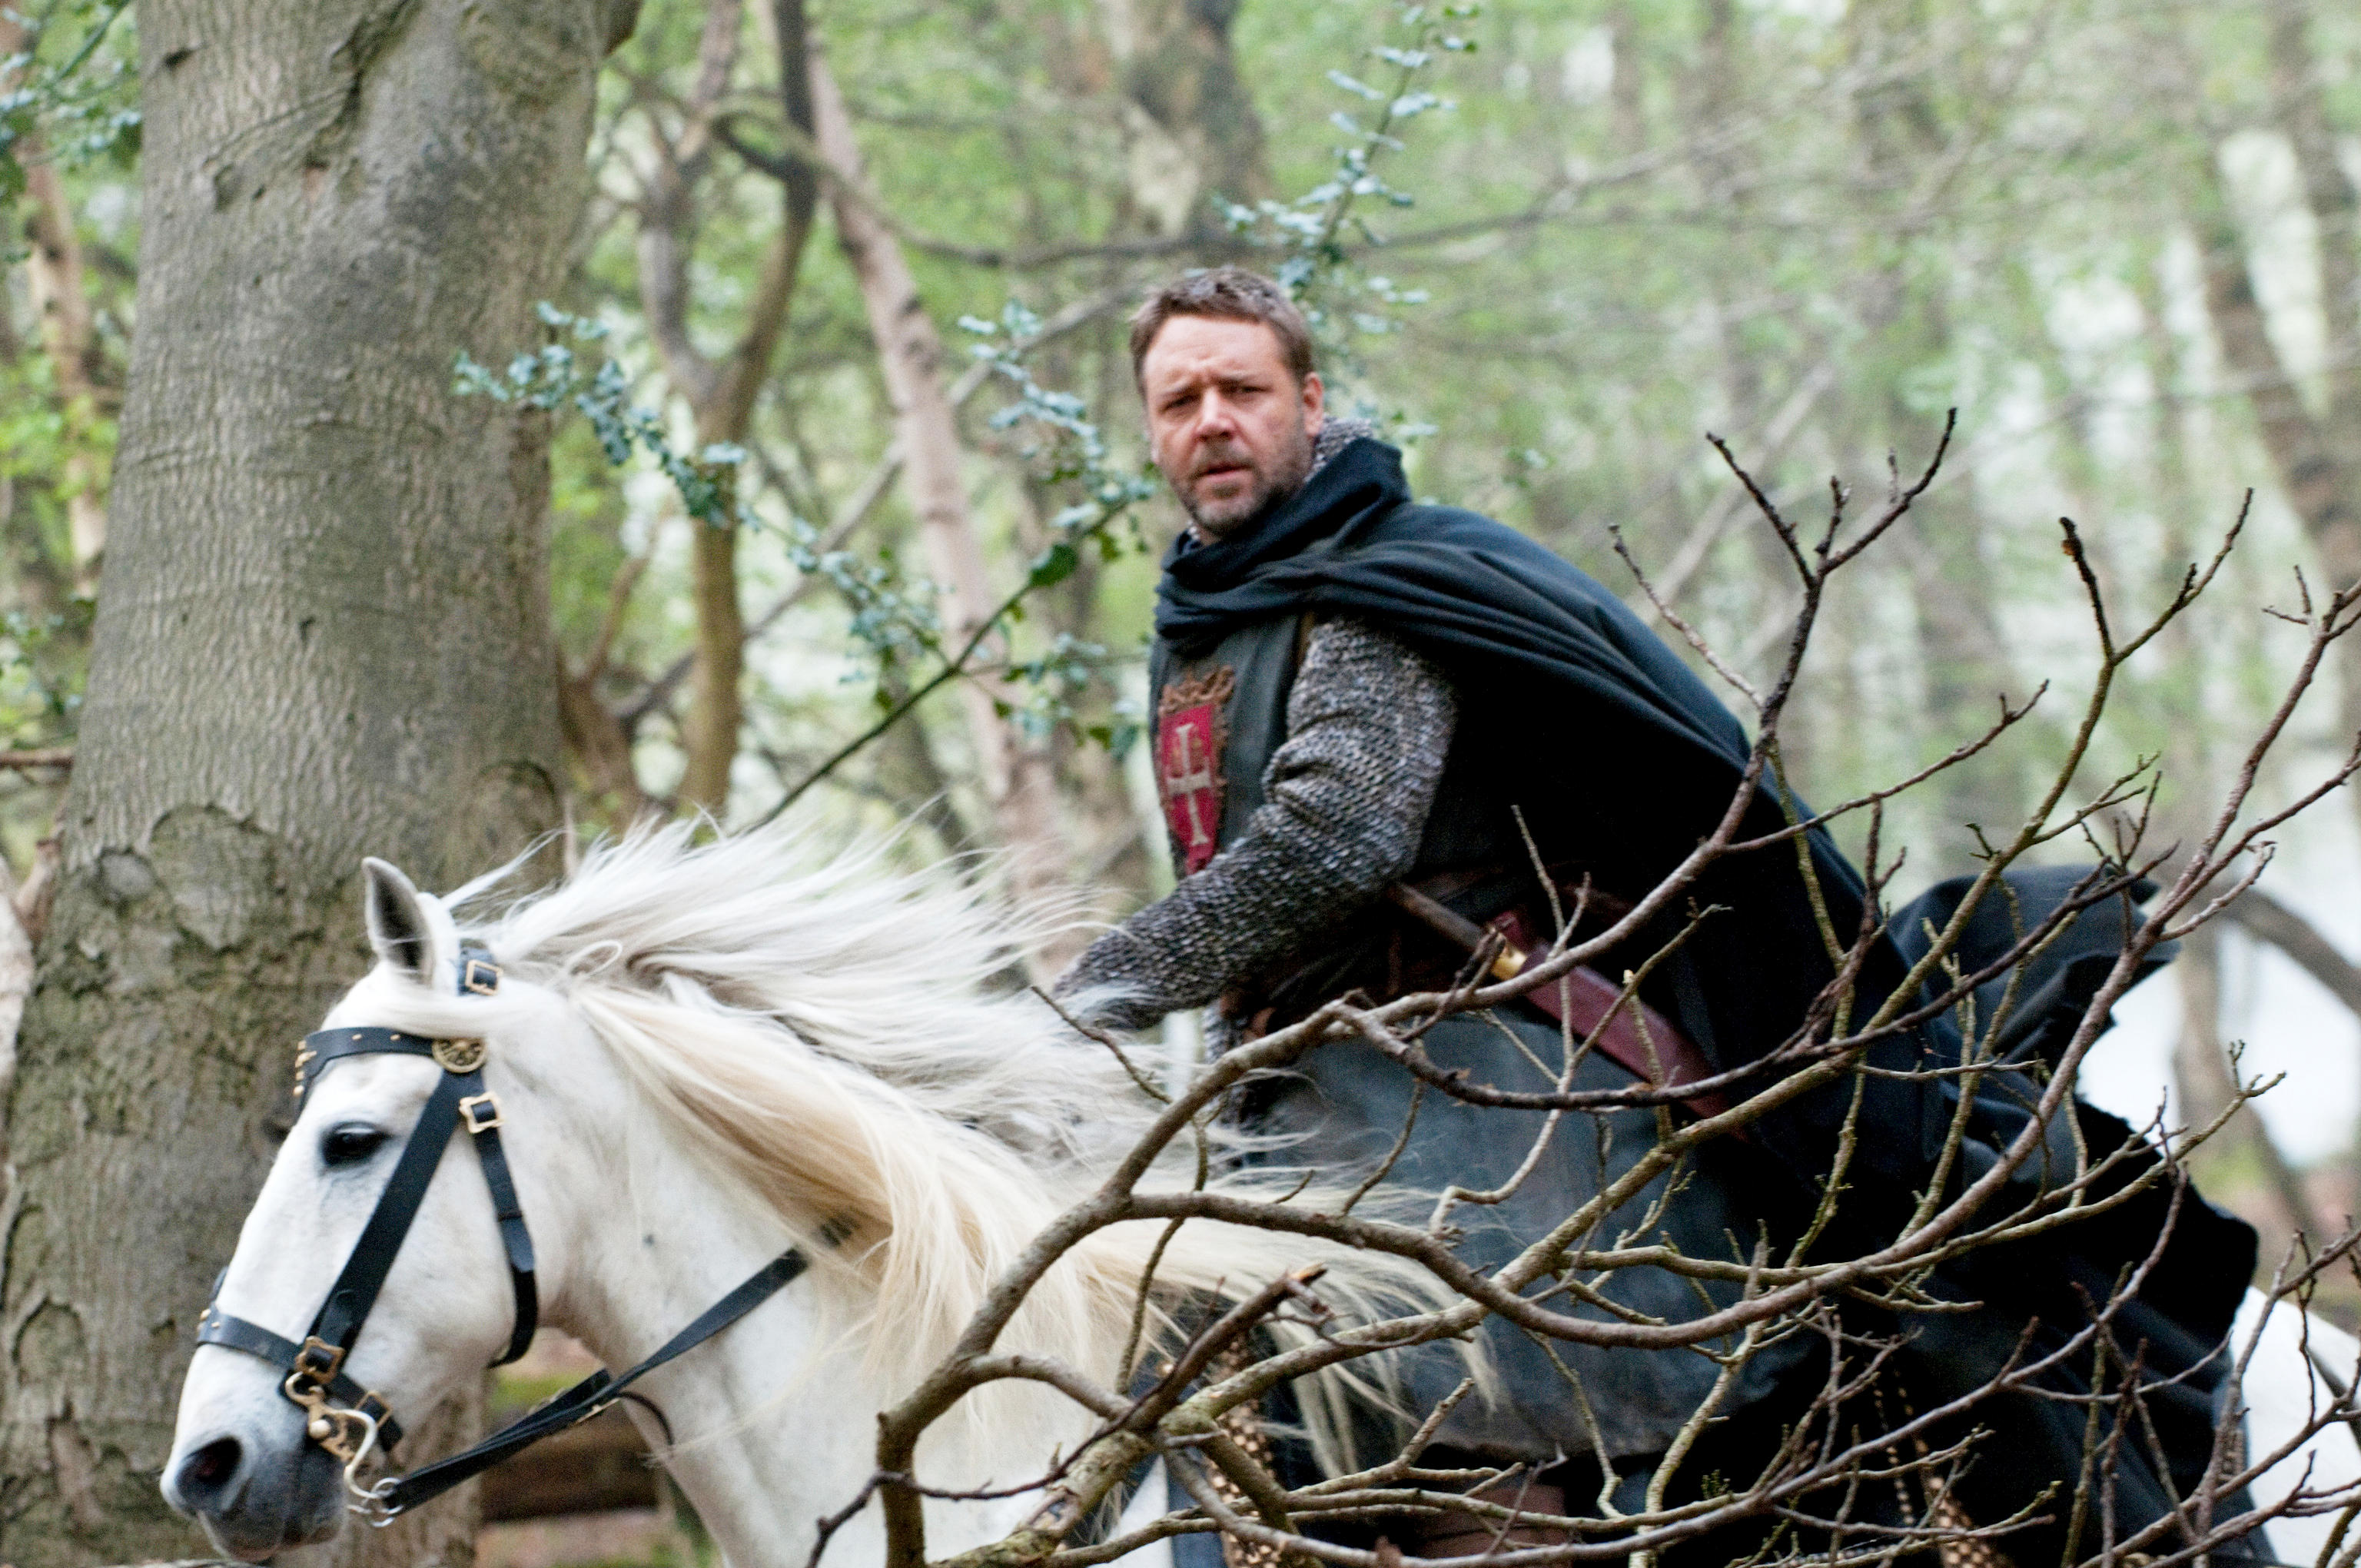 Russell Crowe stars as Robin Hood in Universal Pictures' Robin Hood (2010)